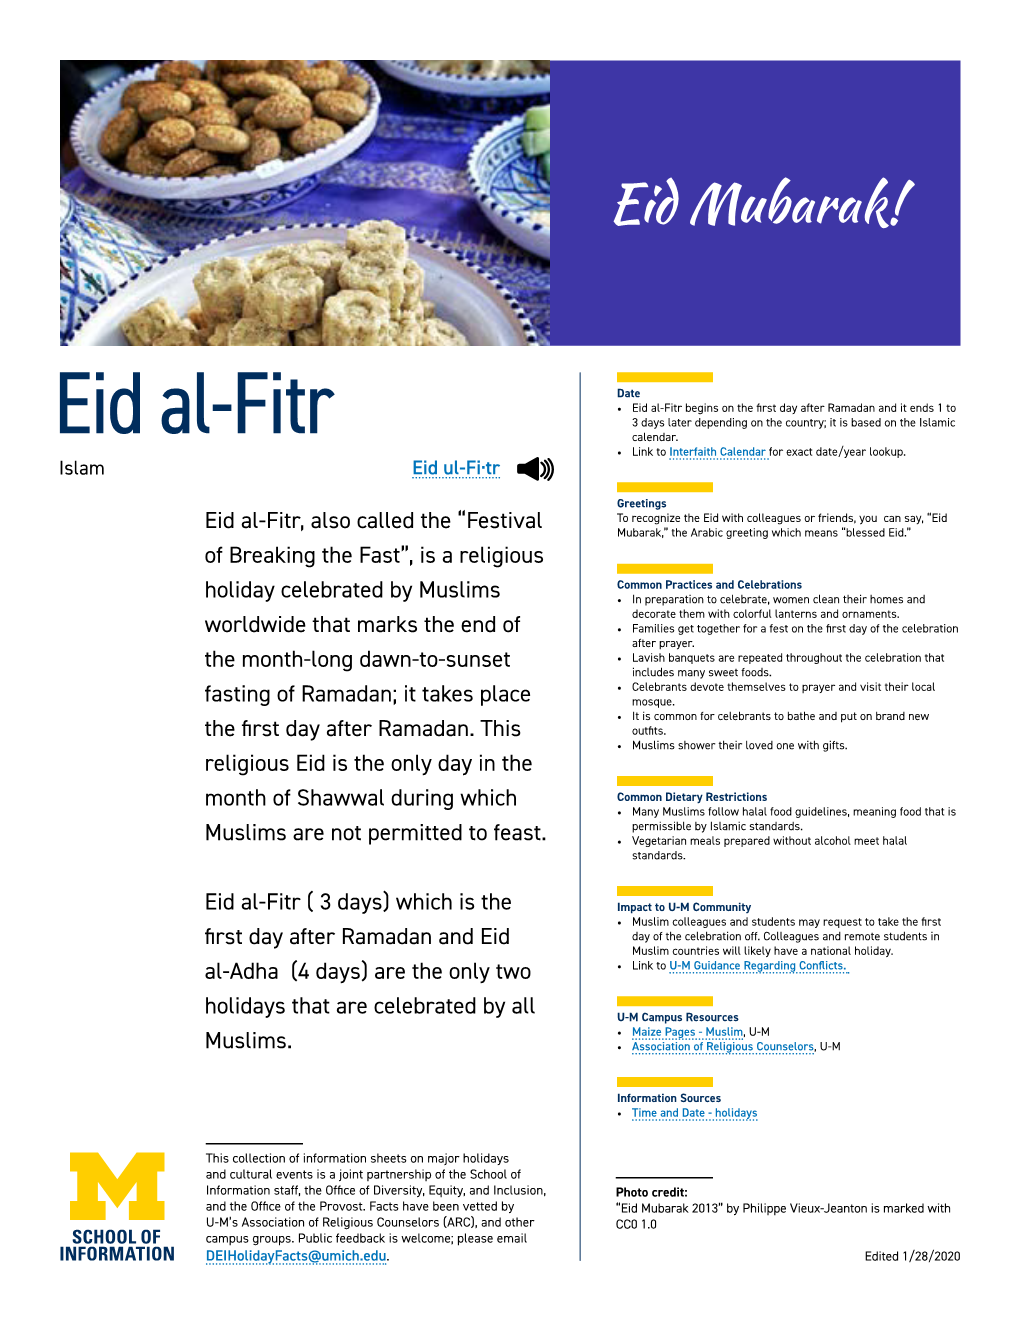 Eid Al-Fitr Begins on the First Day After Ramadan and It Ends 1 to 3 Days Later Depending on the Country; It Is Based on the Islamic Eid Al-Fitr Calendar